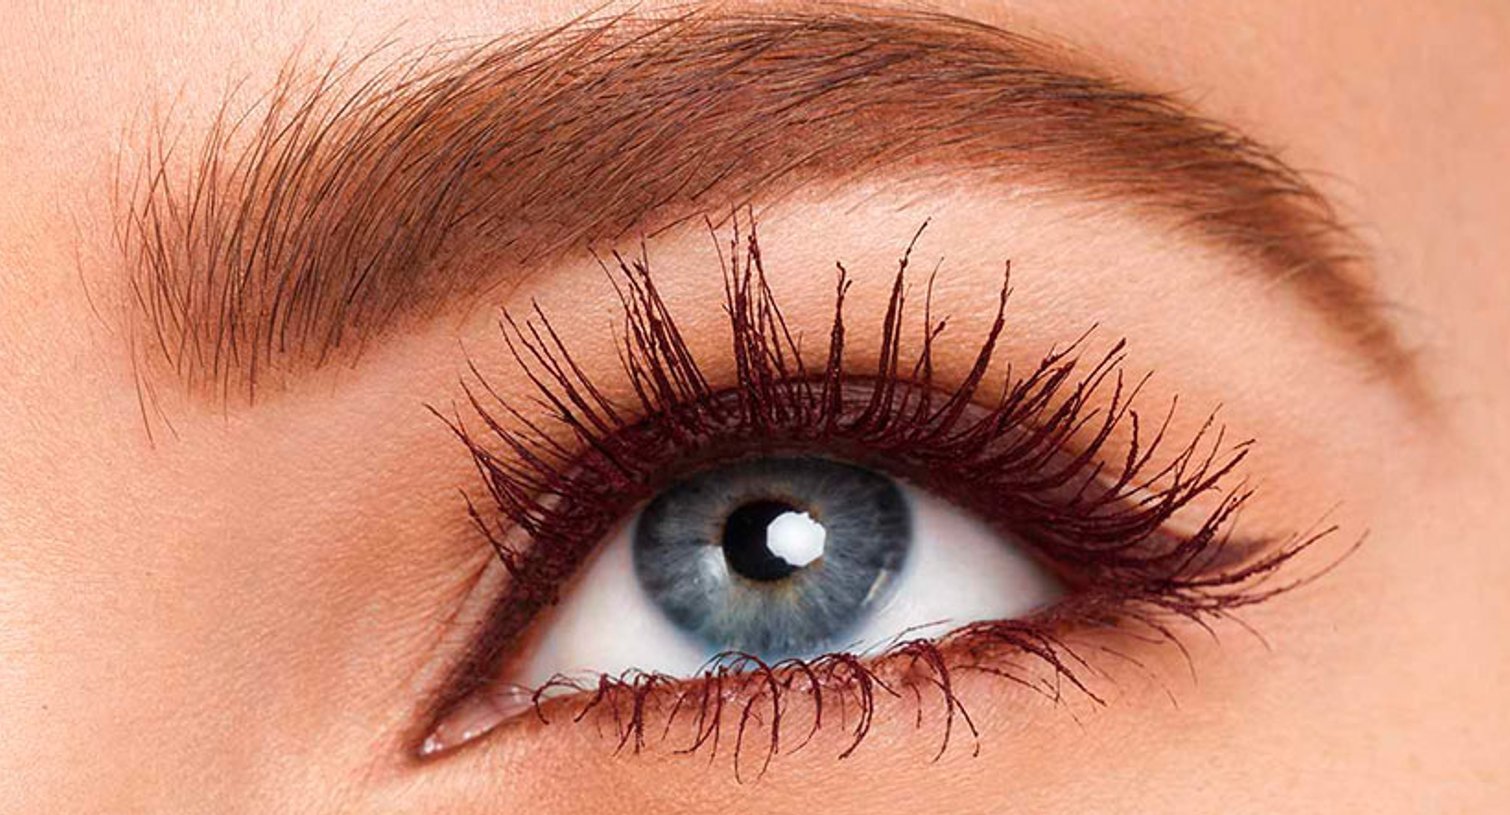 Loreal Paris BMAG Slideshow 4 Eye Makeup Looks That Are Even Better with Burgundy Mascara SLIDE 3